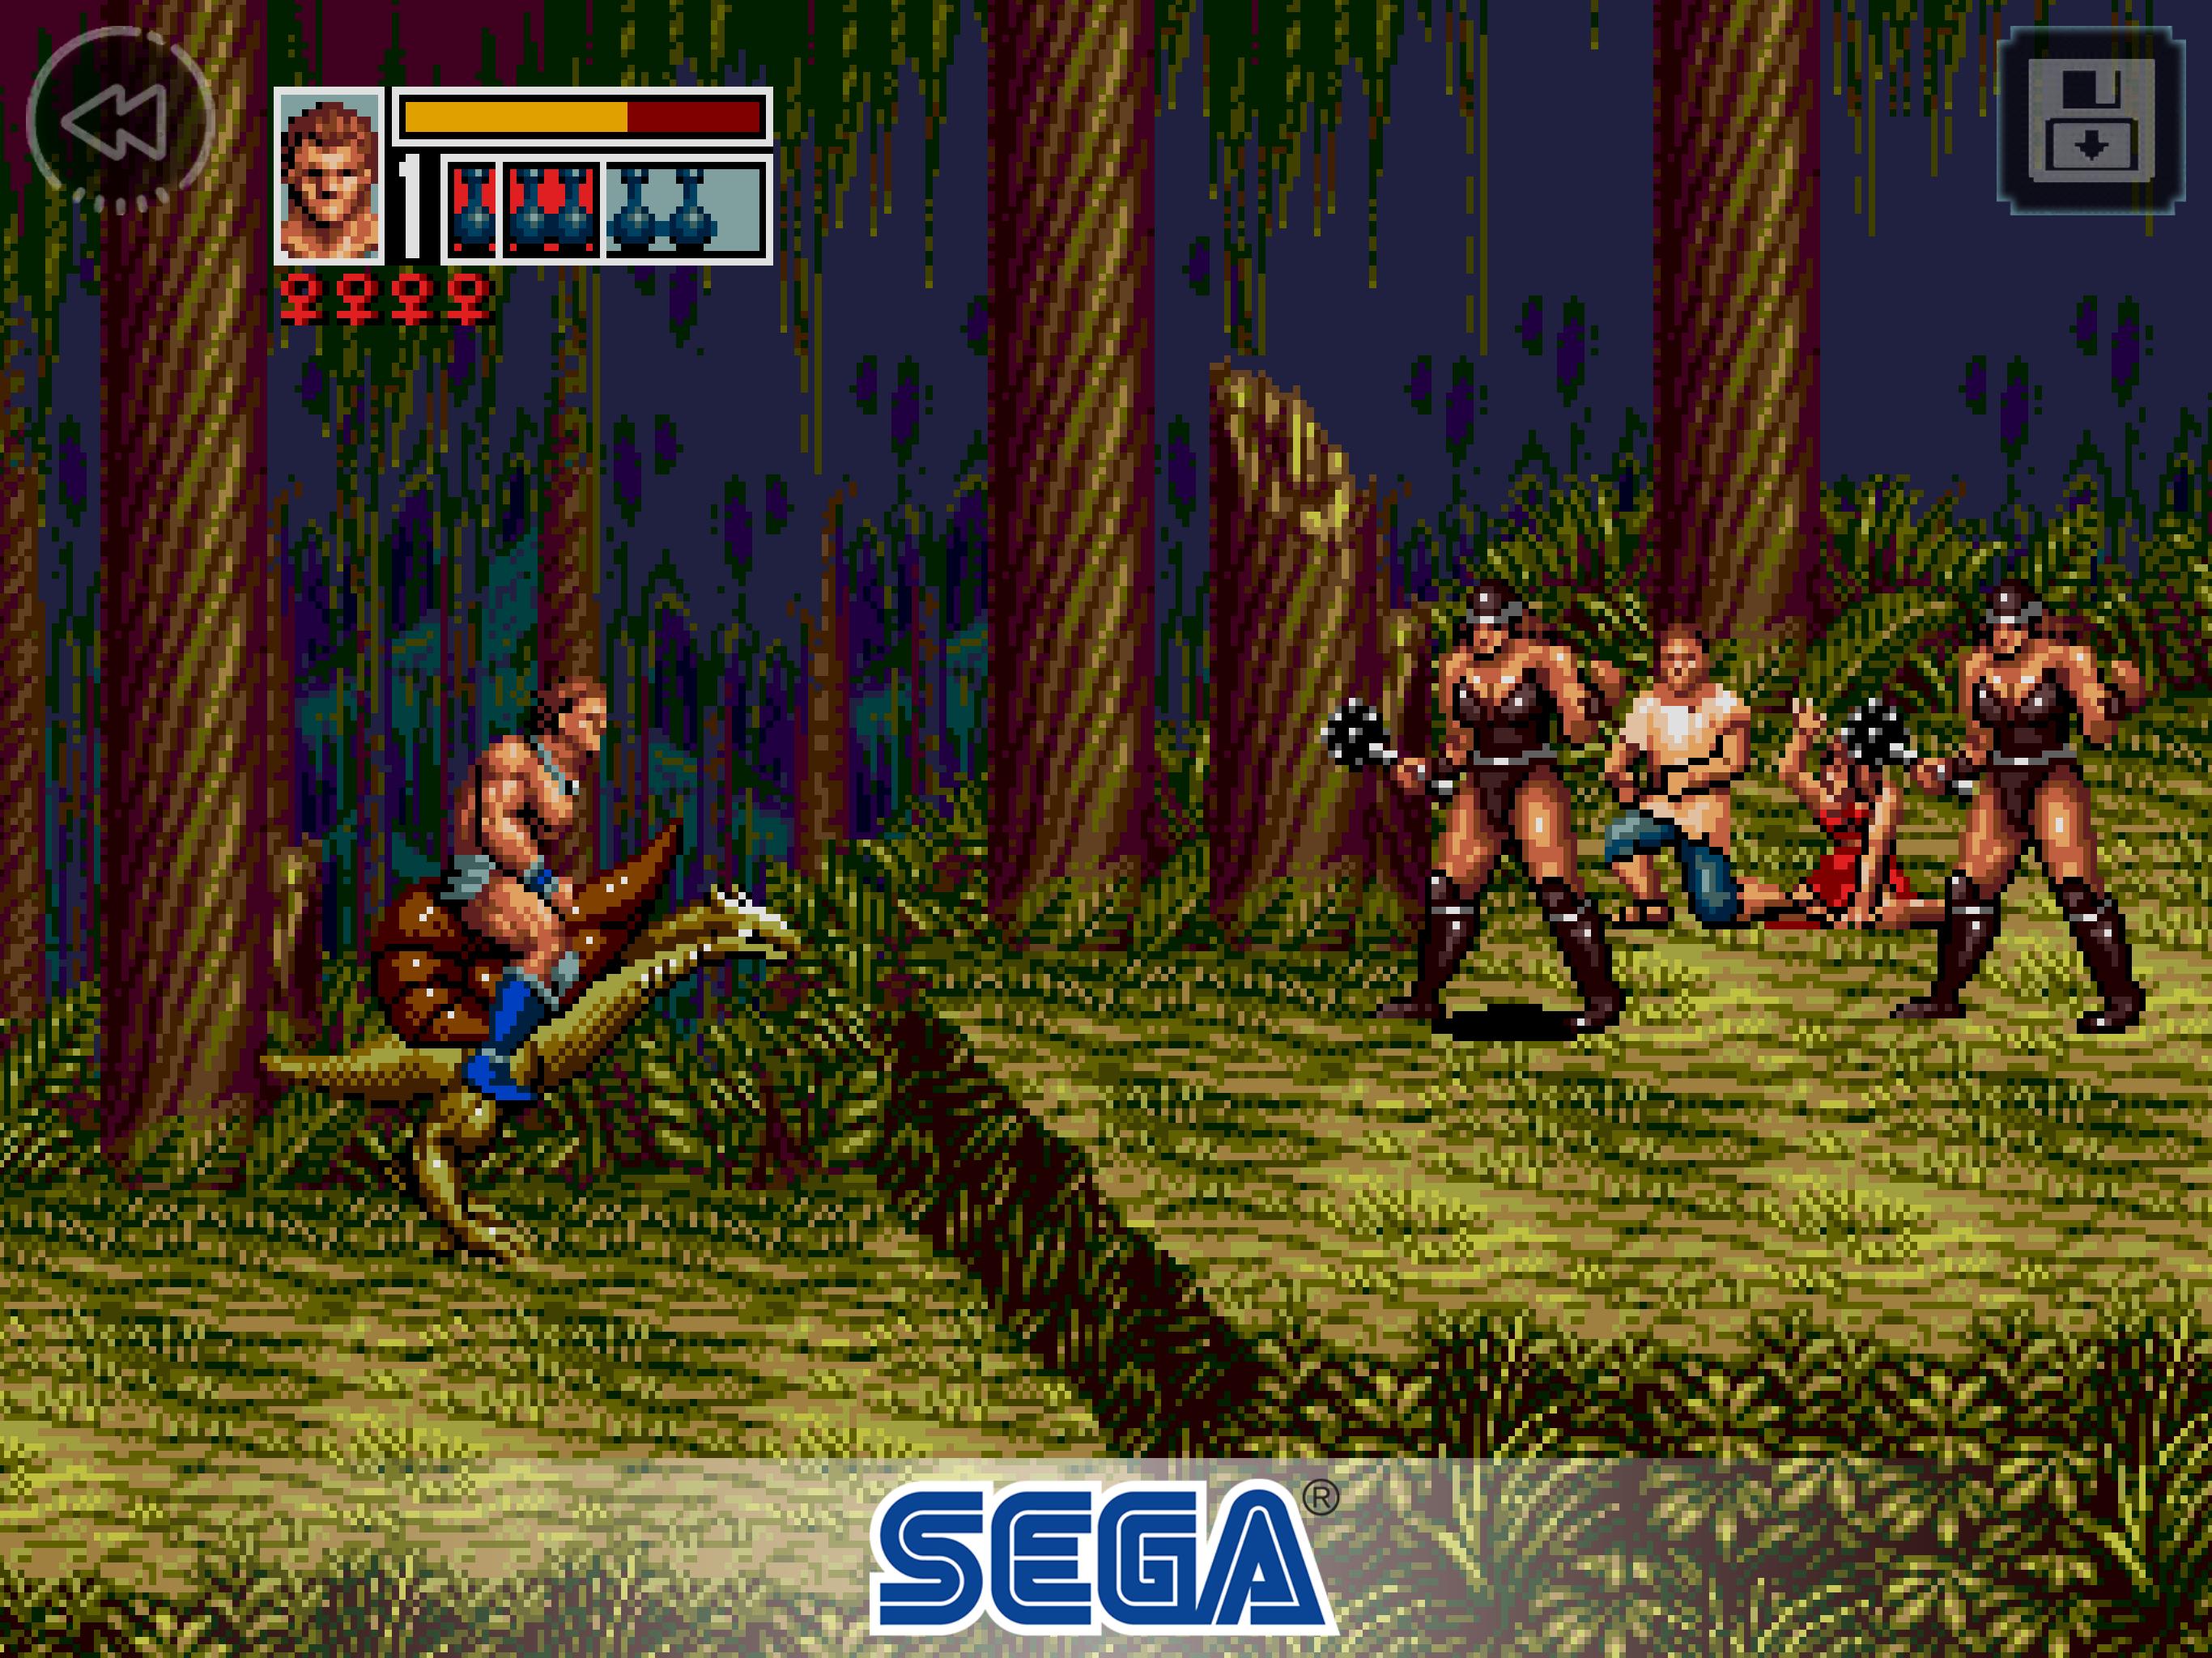 Golden Axe Classics for Android - APK Download